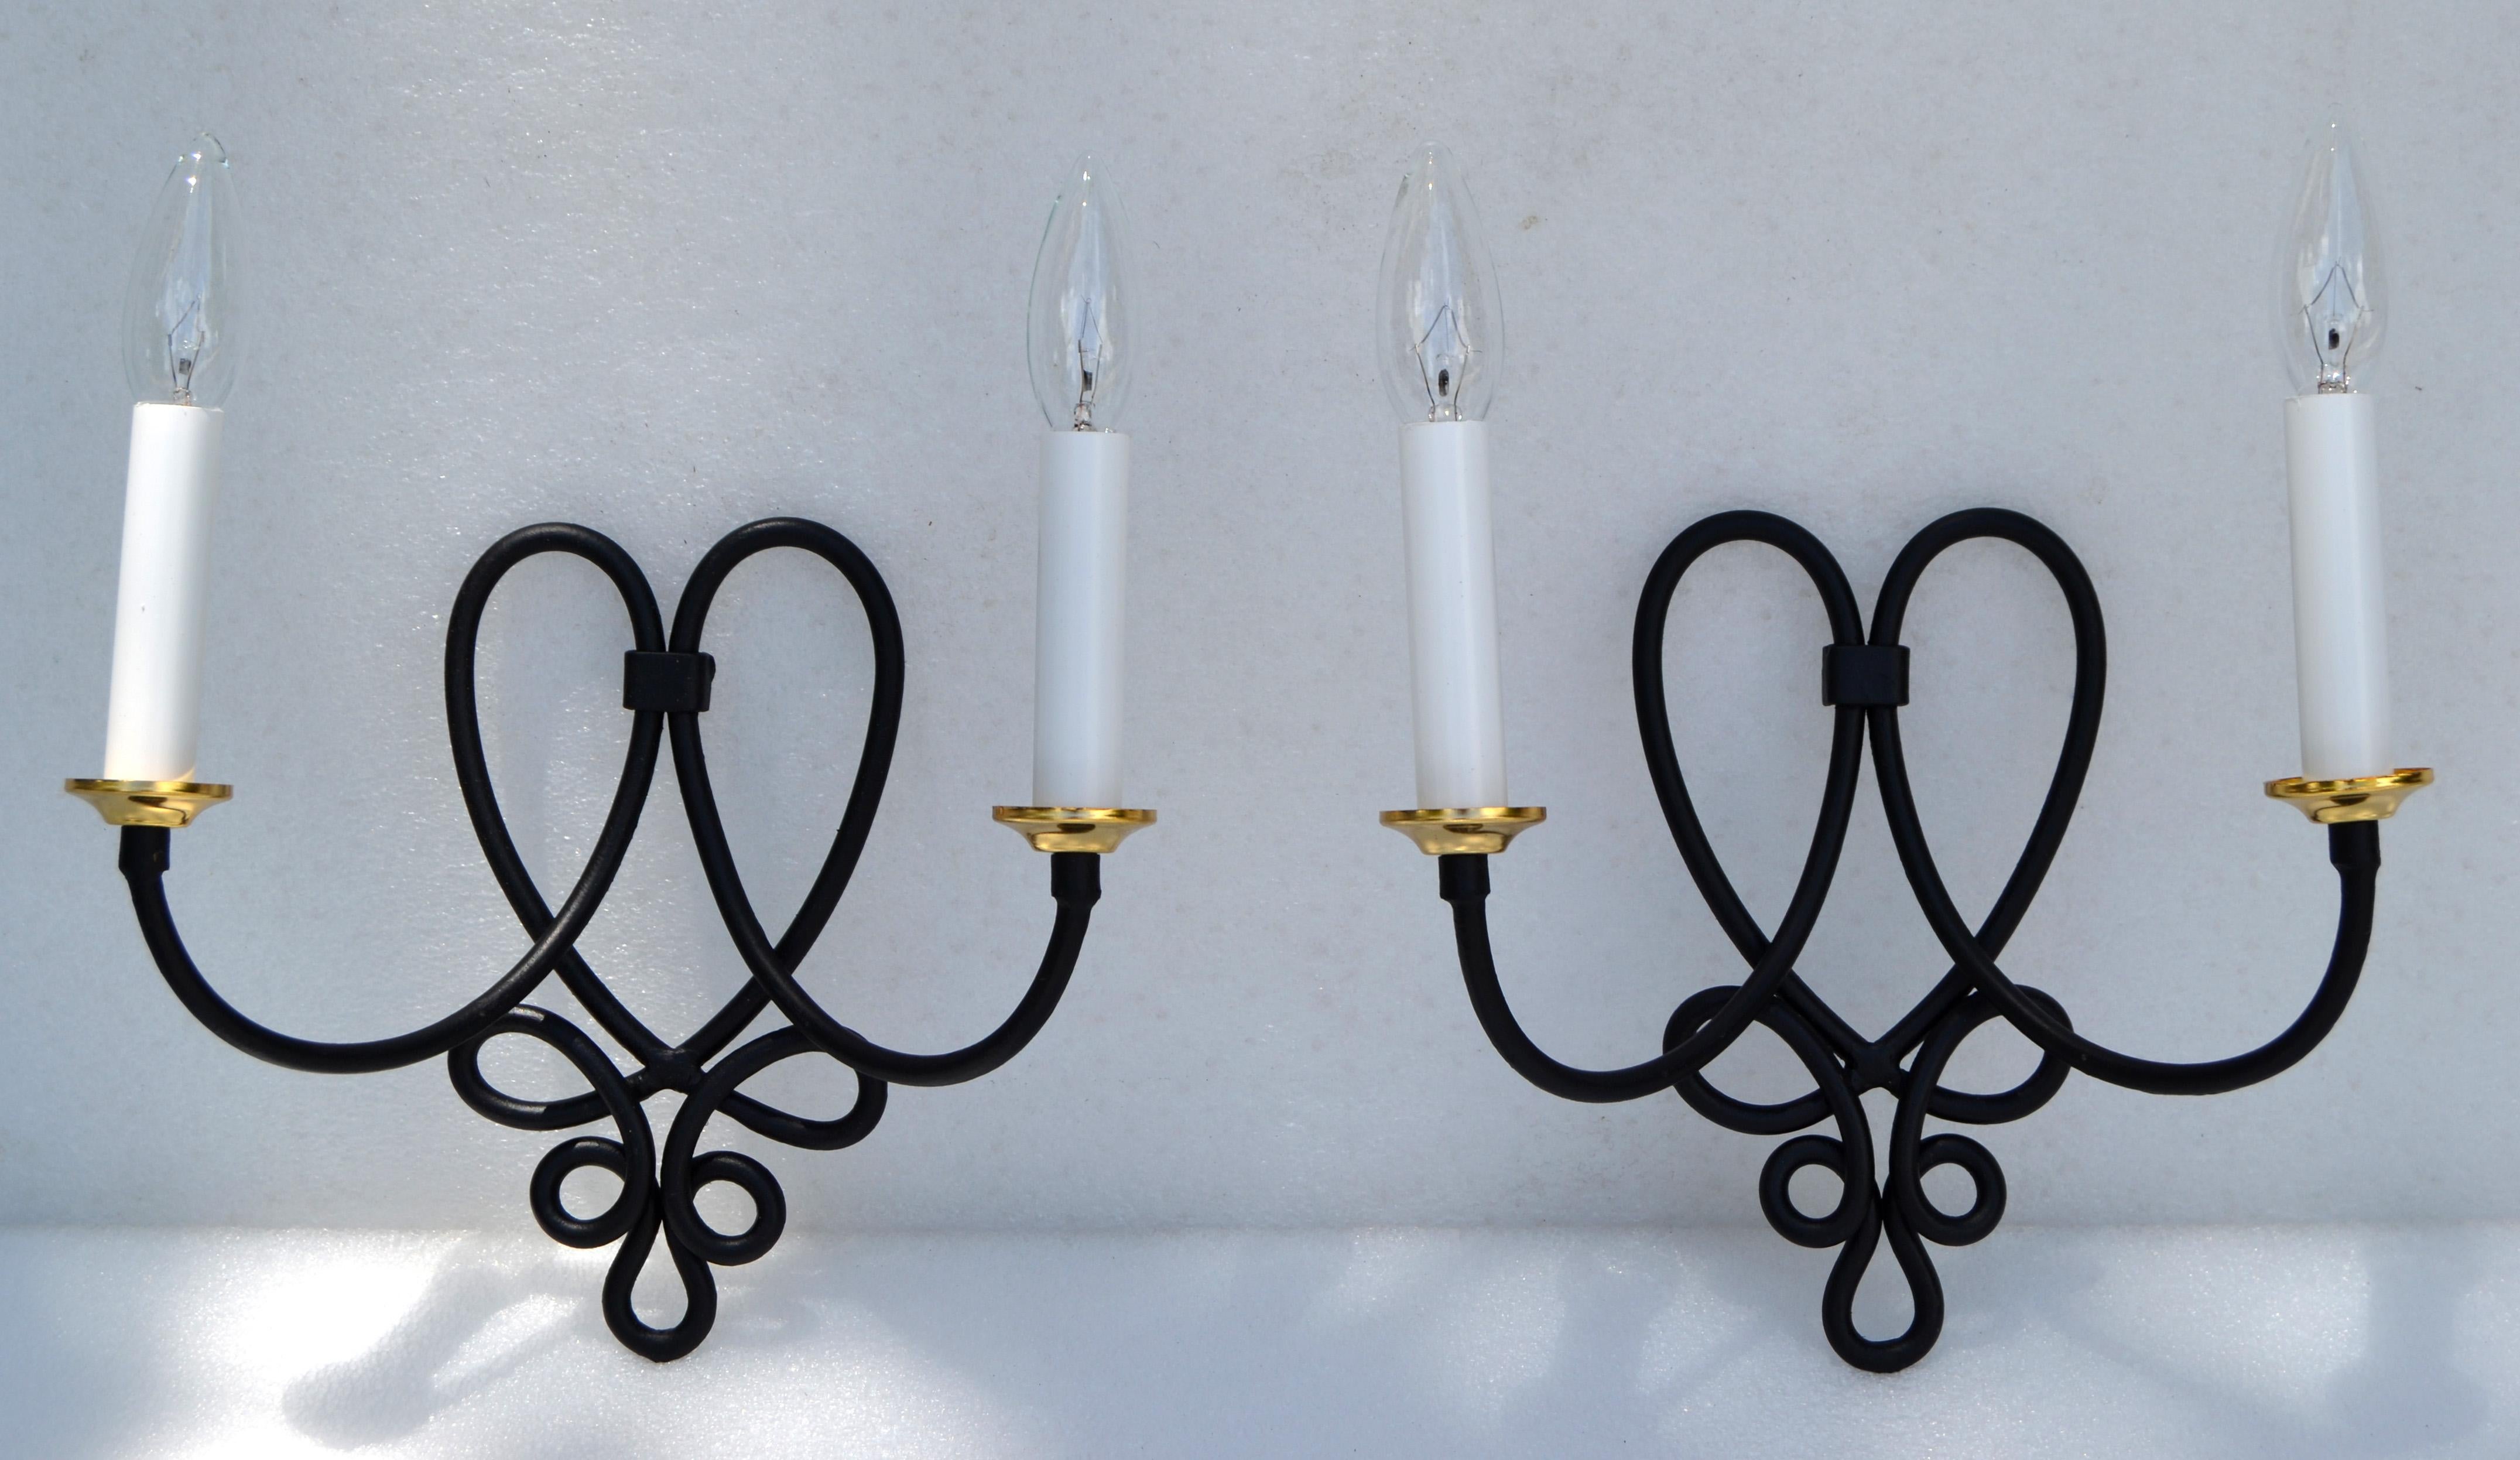 Pair, Rene Prou French 2 Lights Wrought Iron & Brass Wall Sconces Black Finish For Sale 3